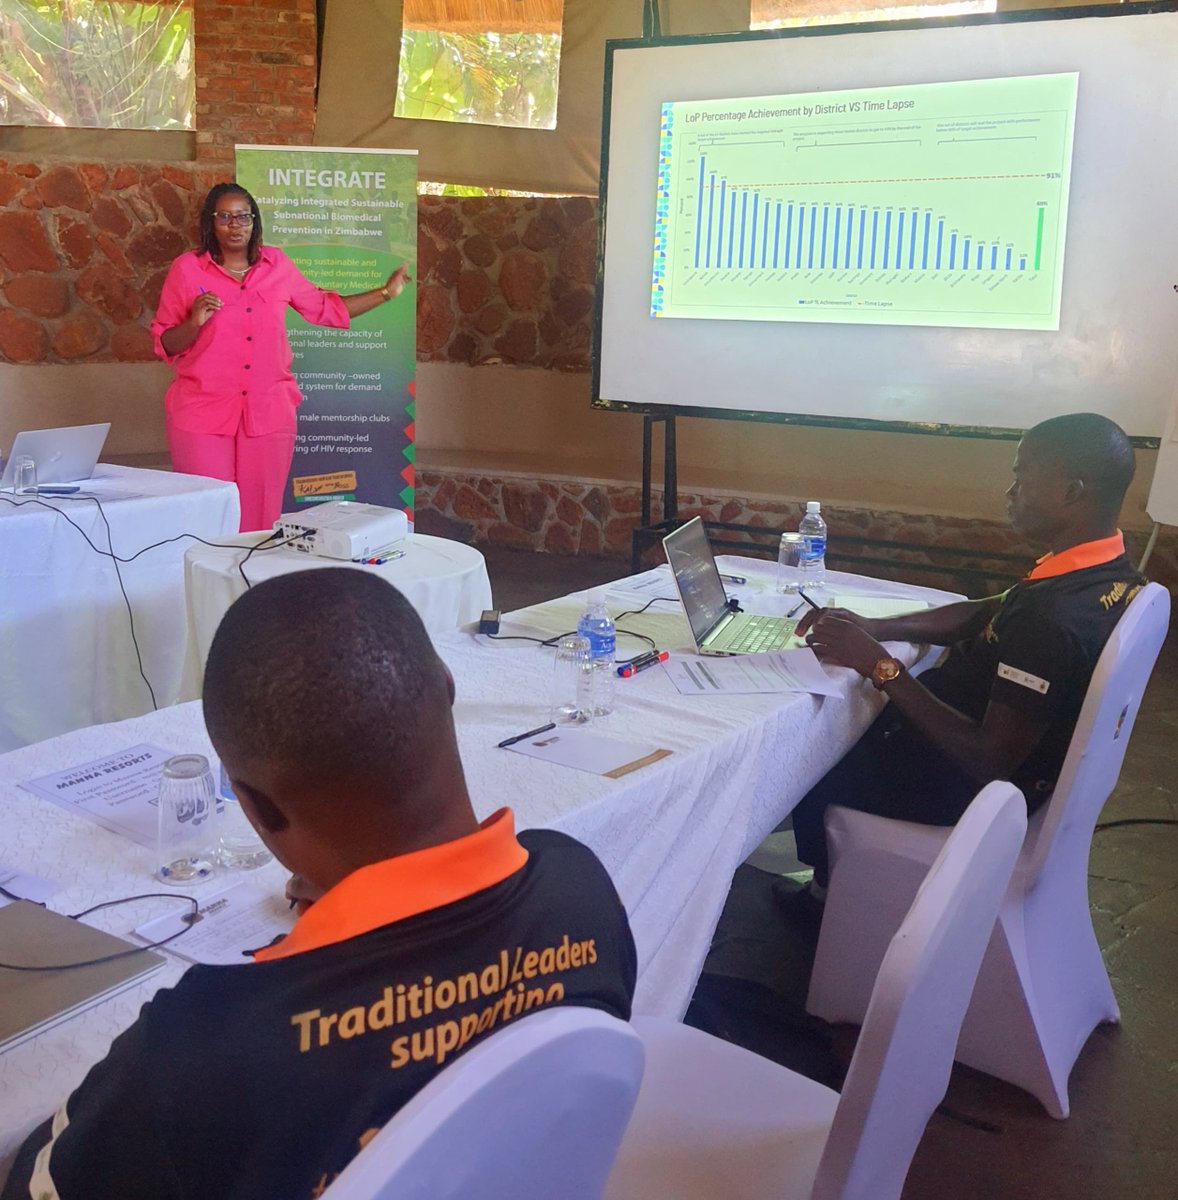 SAfAIDS #Zim 🇿🇼 under INTEGRATE Prog, with support from @PSHZim, held annual planning and reflection meeting with our partners, exploring successes, learning, countering challenges to #VMMC uptake & strengthening sustainability strategies in collaboration with the @MoHCCZim